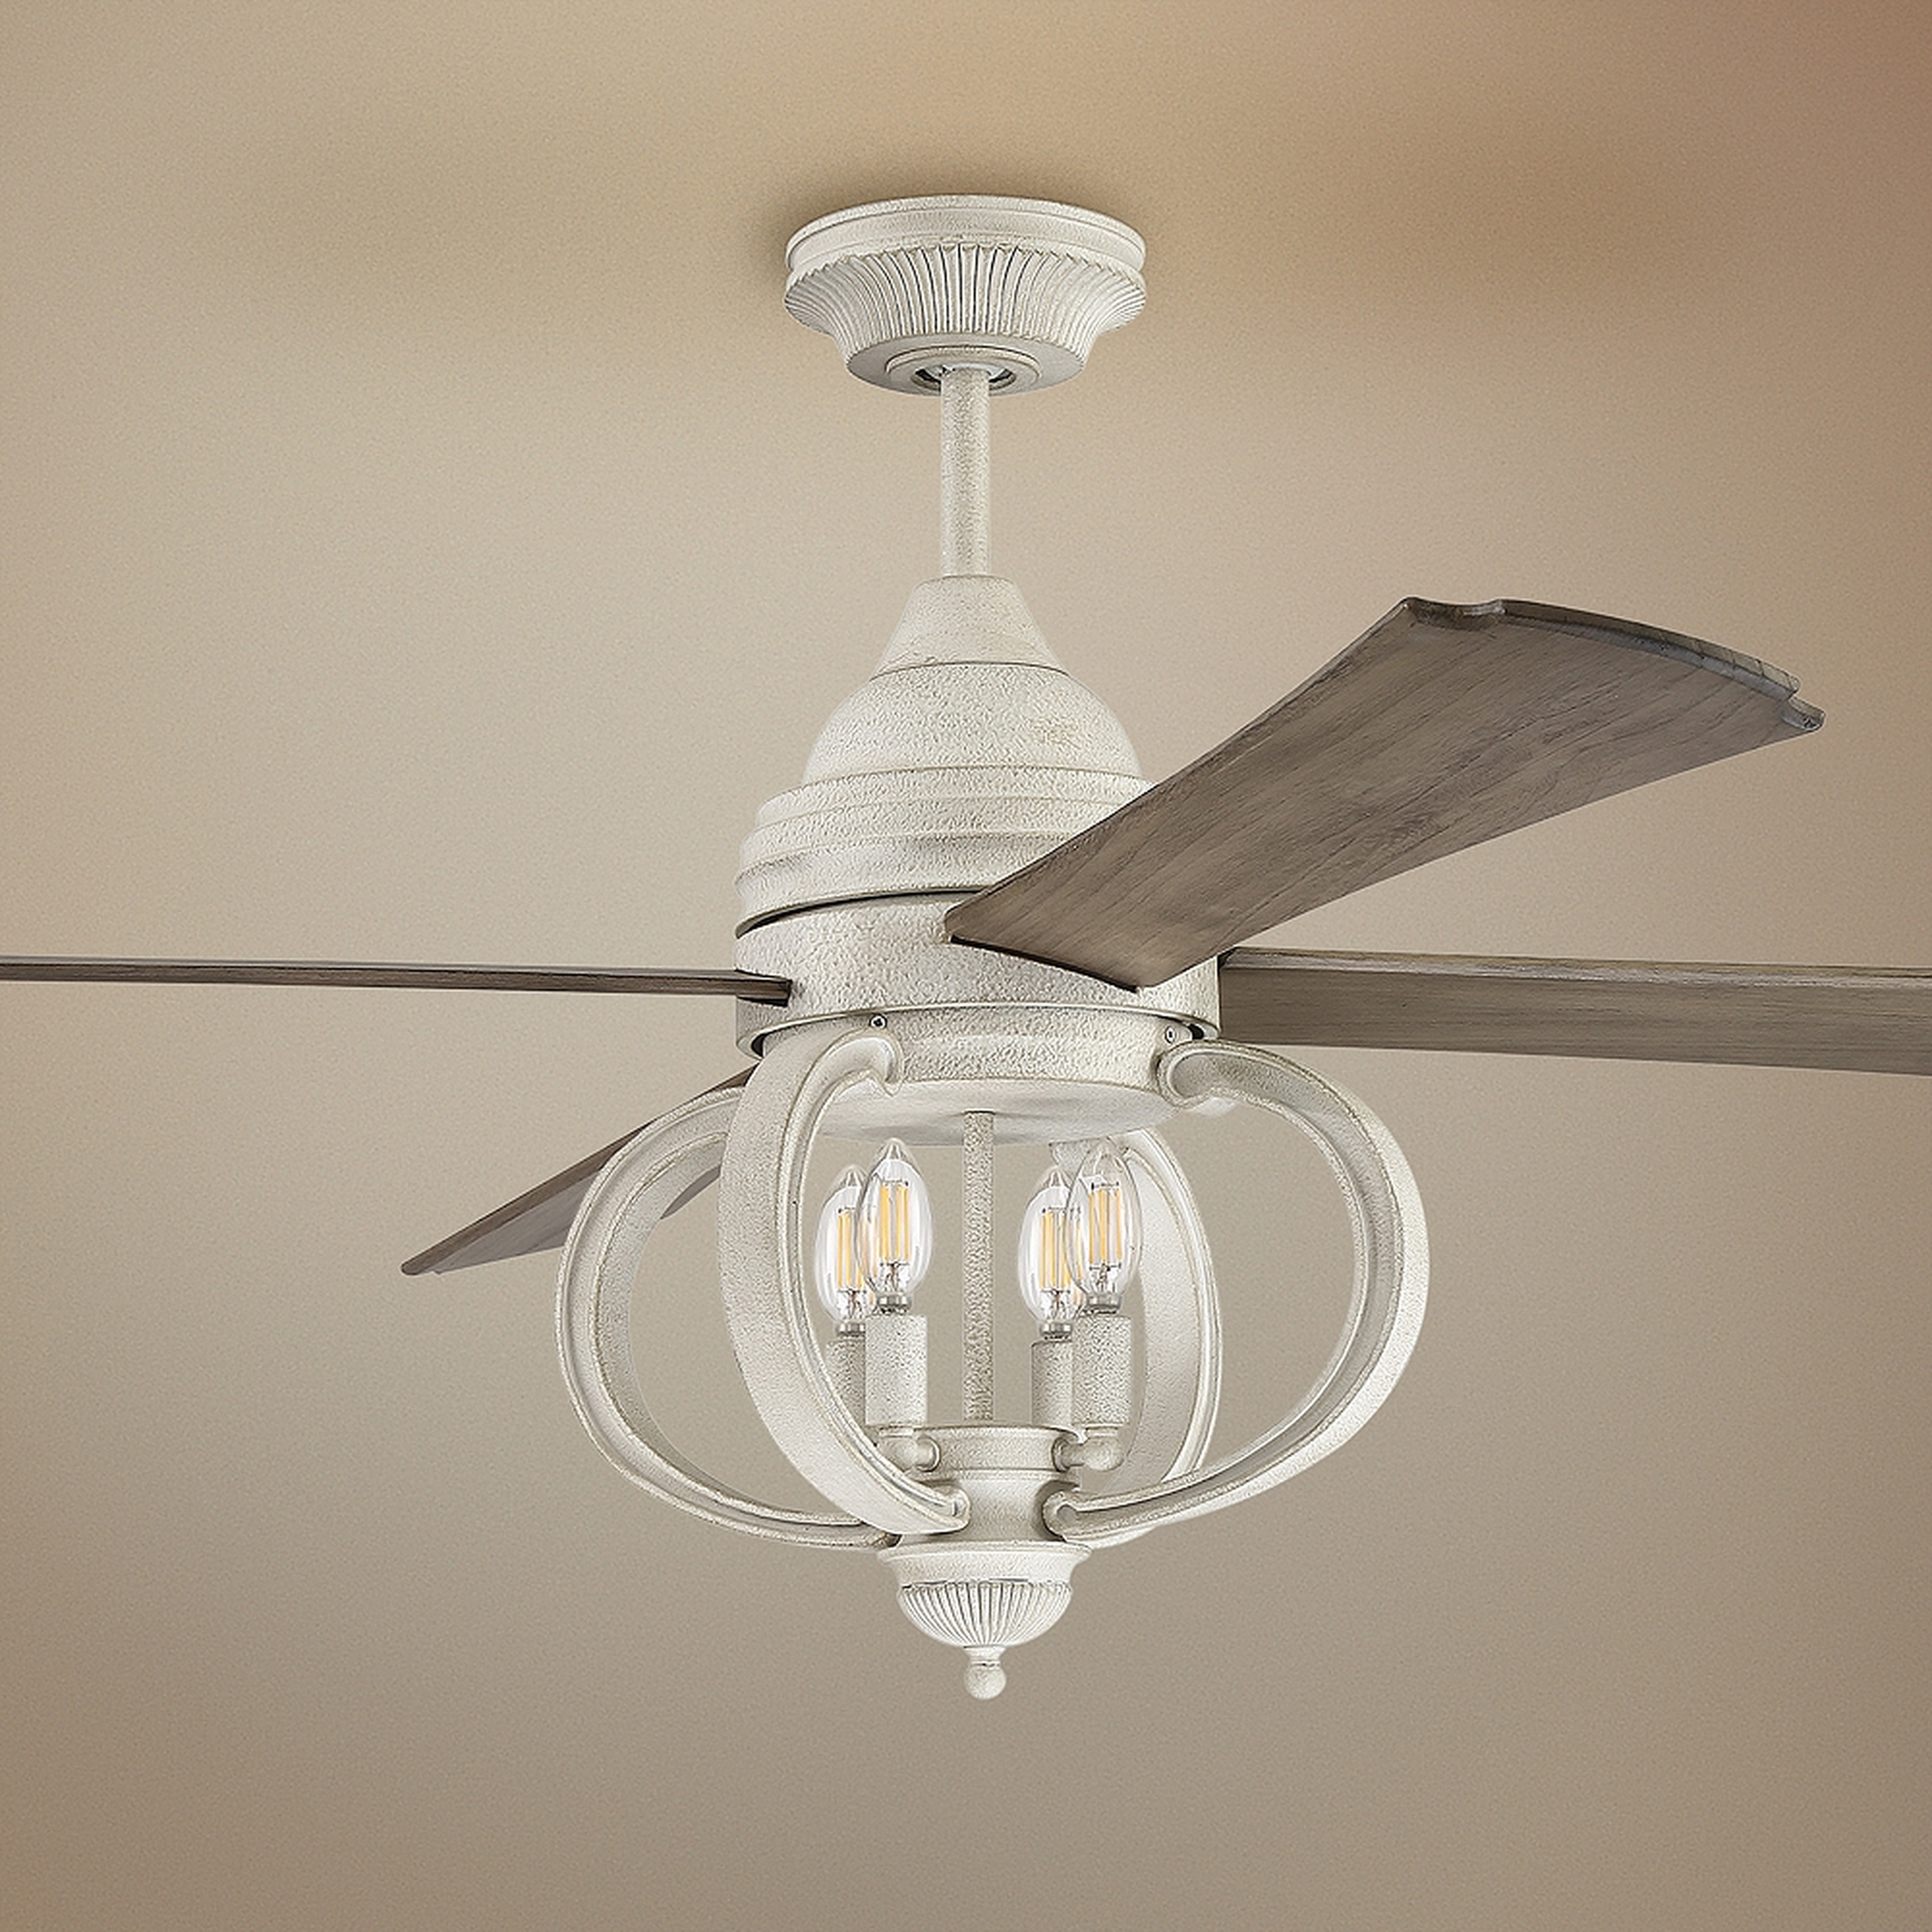 60" Augusta Ceiling Fan in Cottage White - Style # 70G05 - Lamps Plus